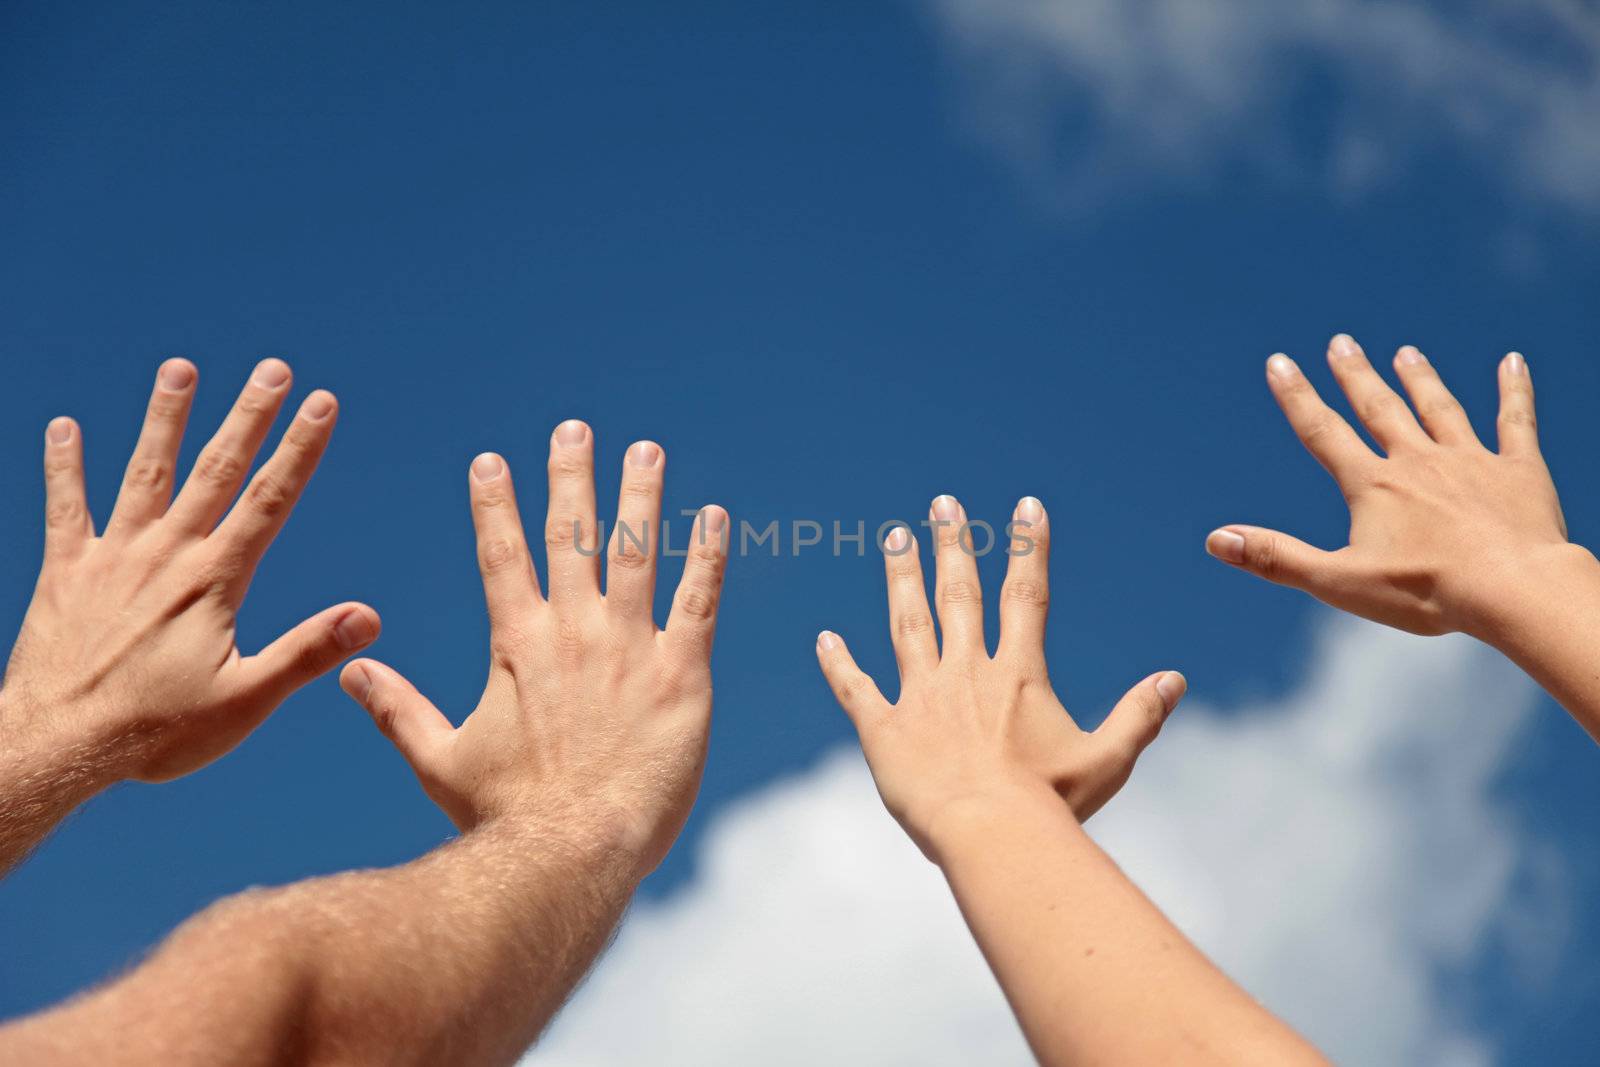 Two persons lifting their hands up in the air.